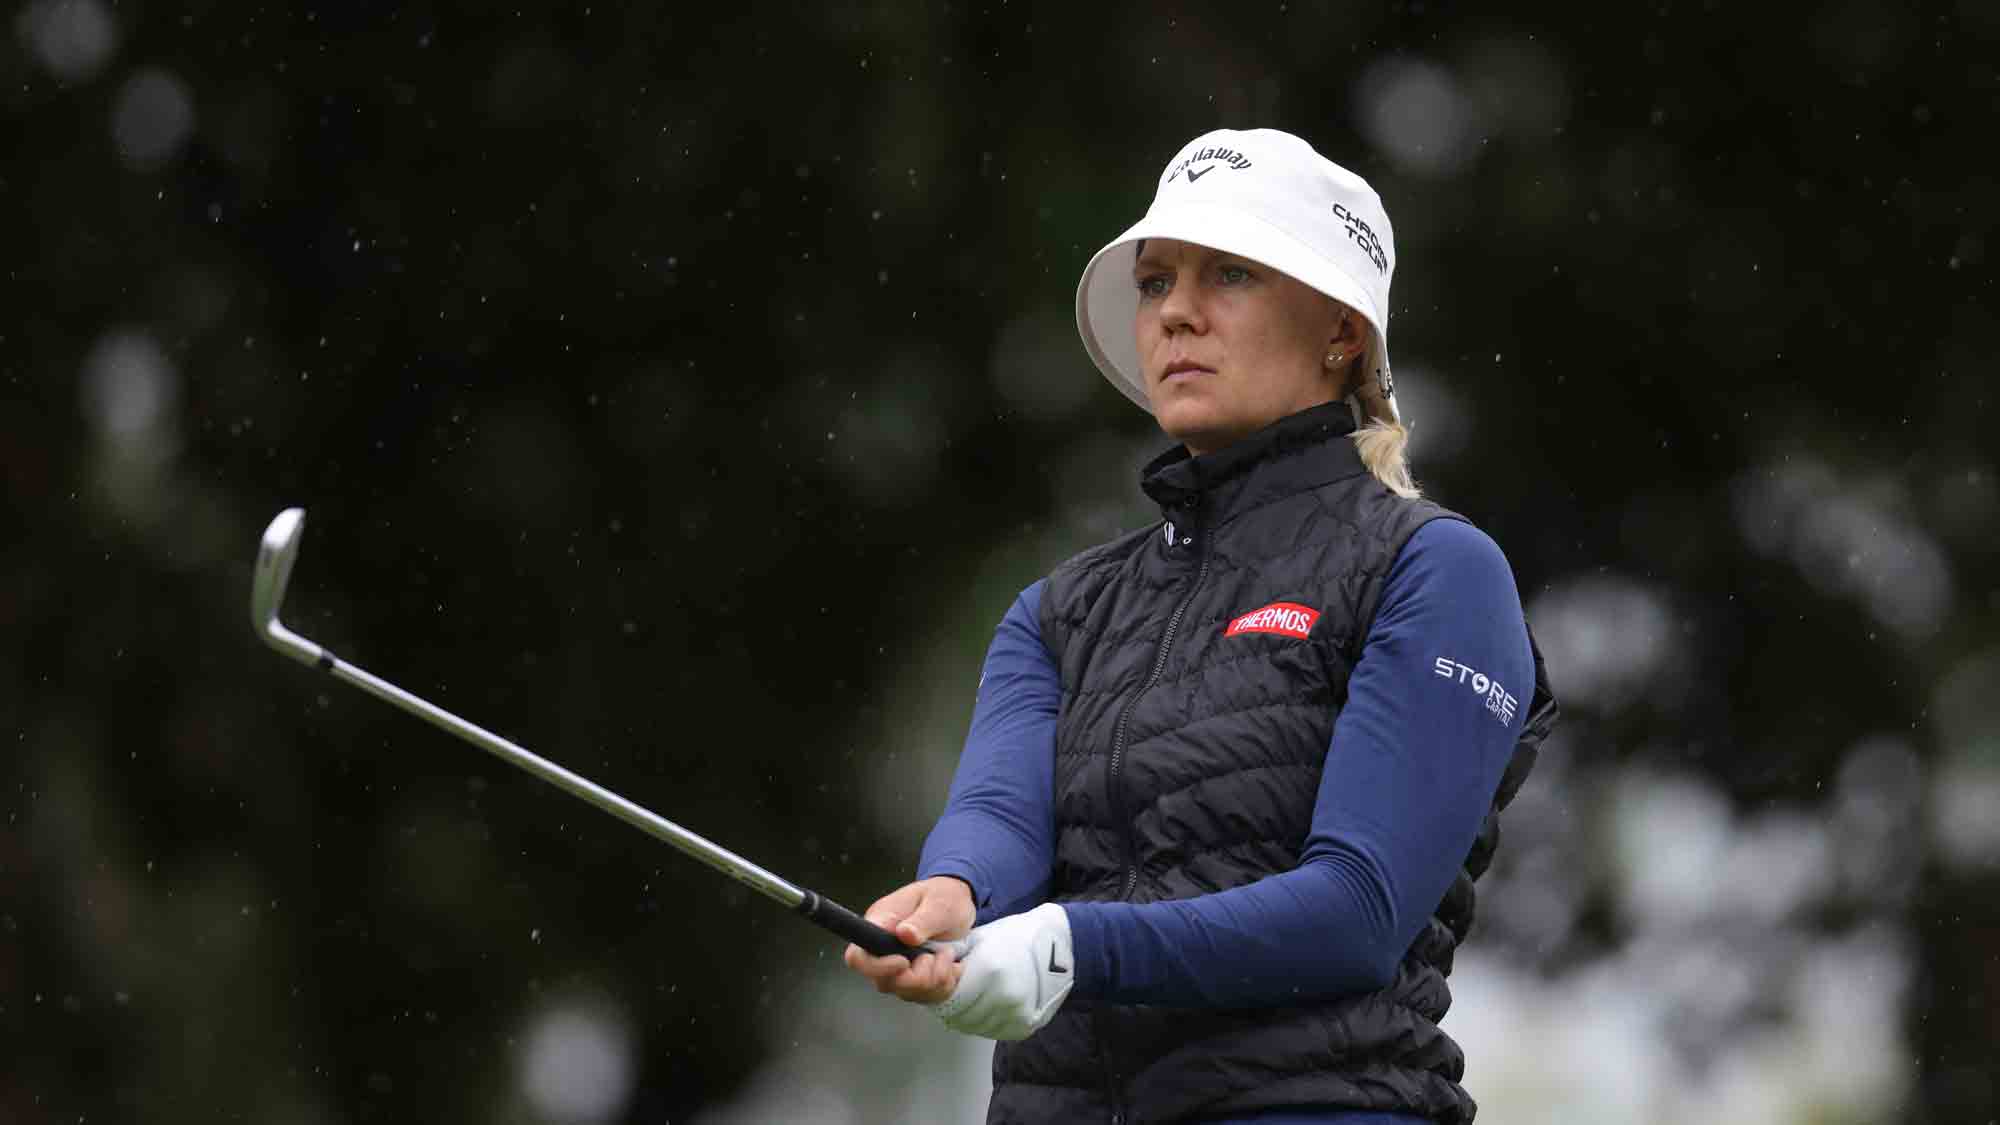 Sagstrom, Zhang Share Lead at Cognizant Founders Cup LPGA Ladies Professional Golf Association